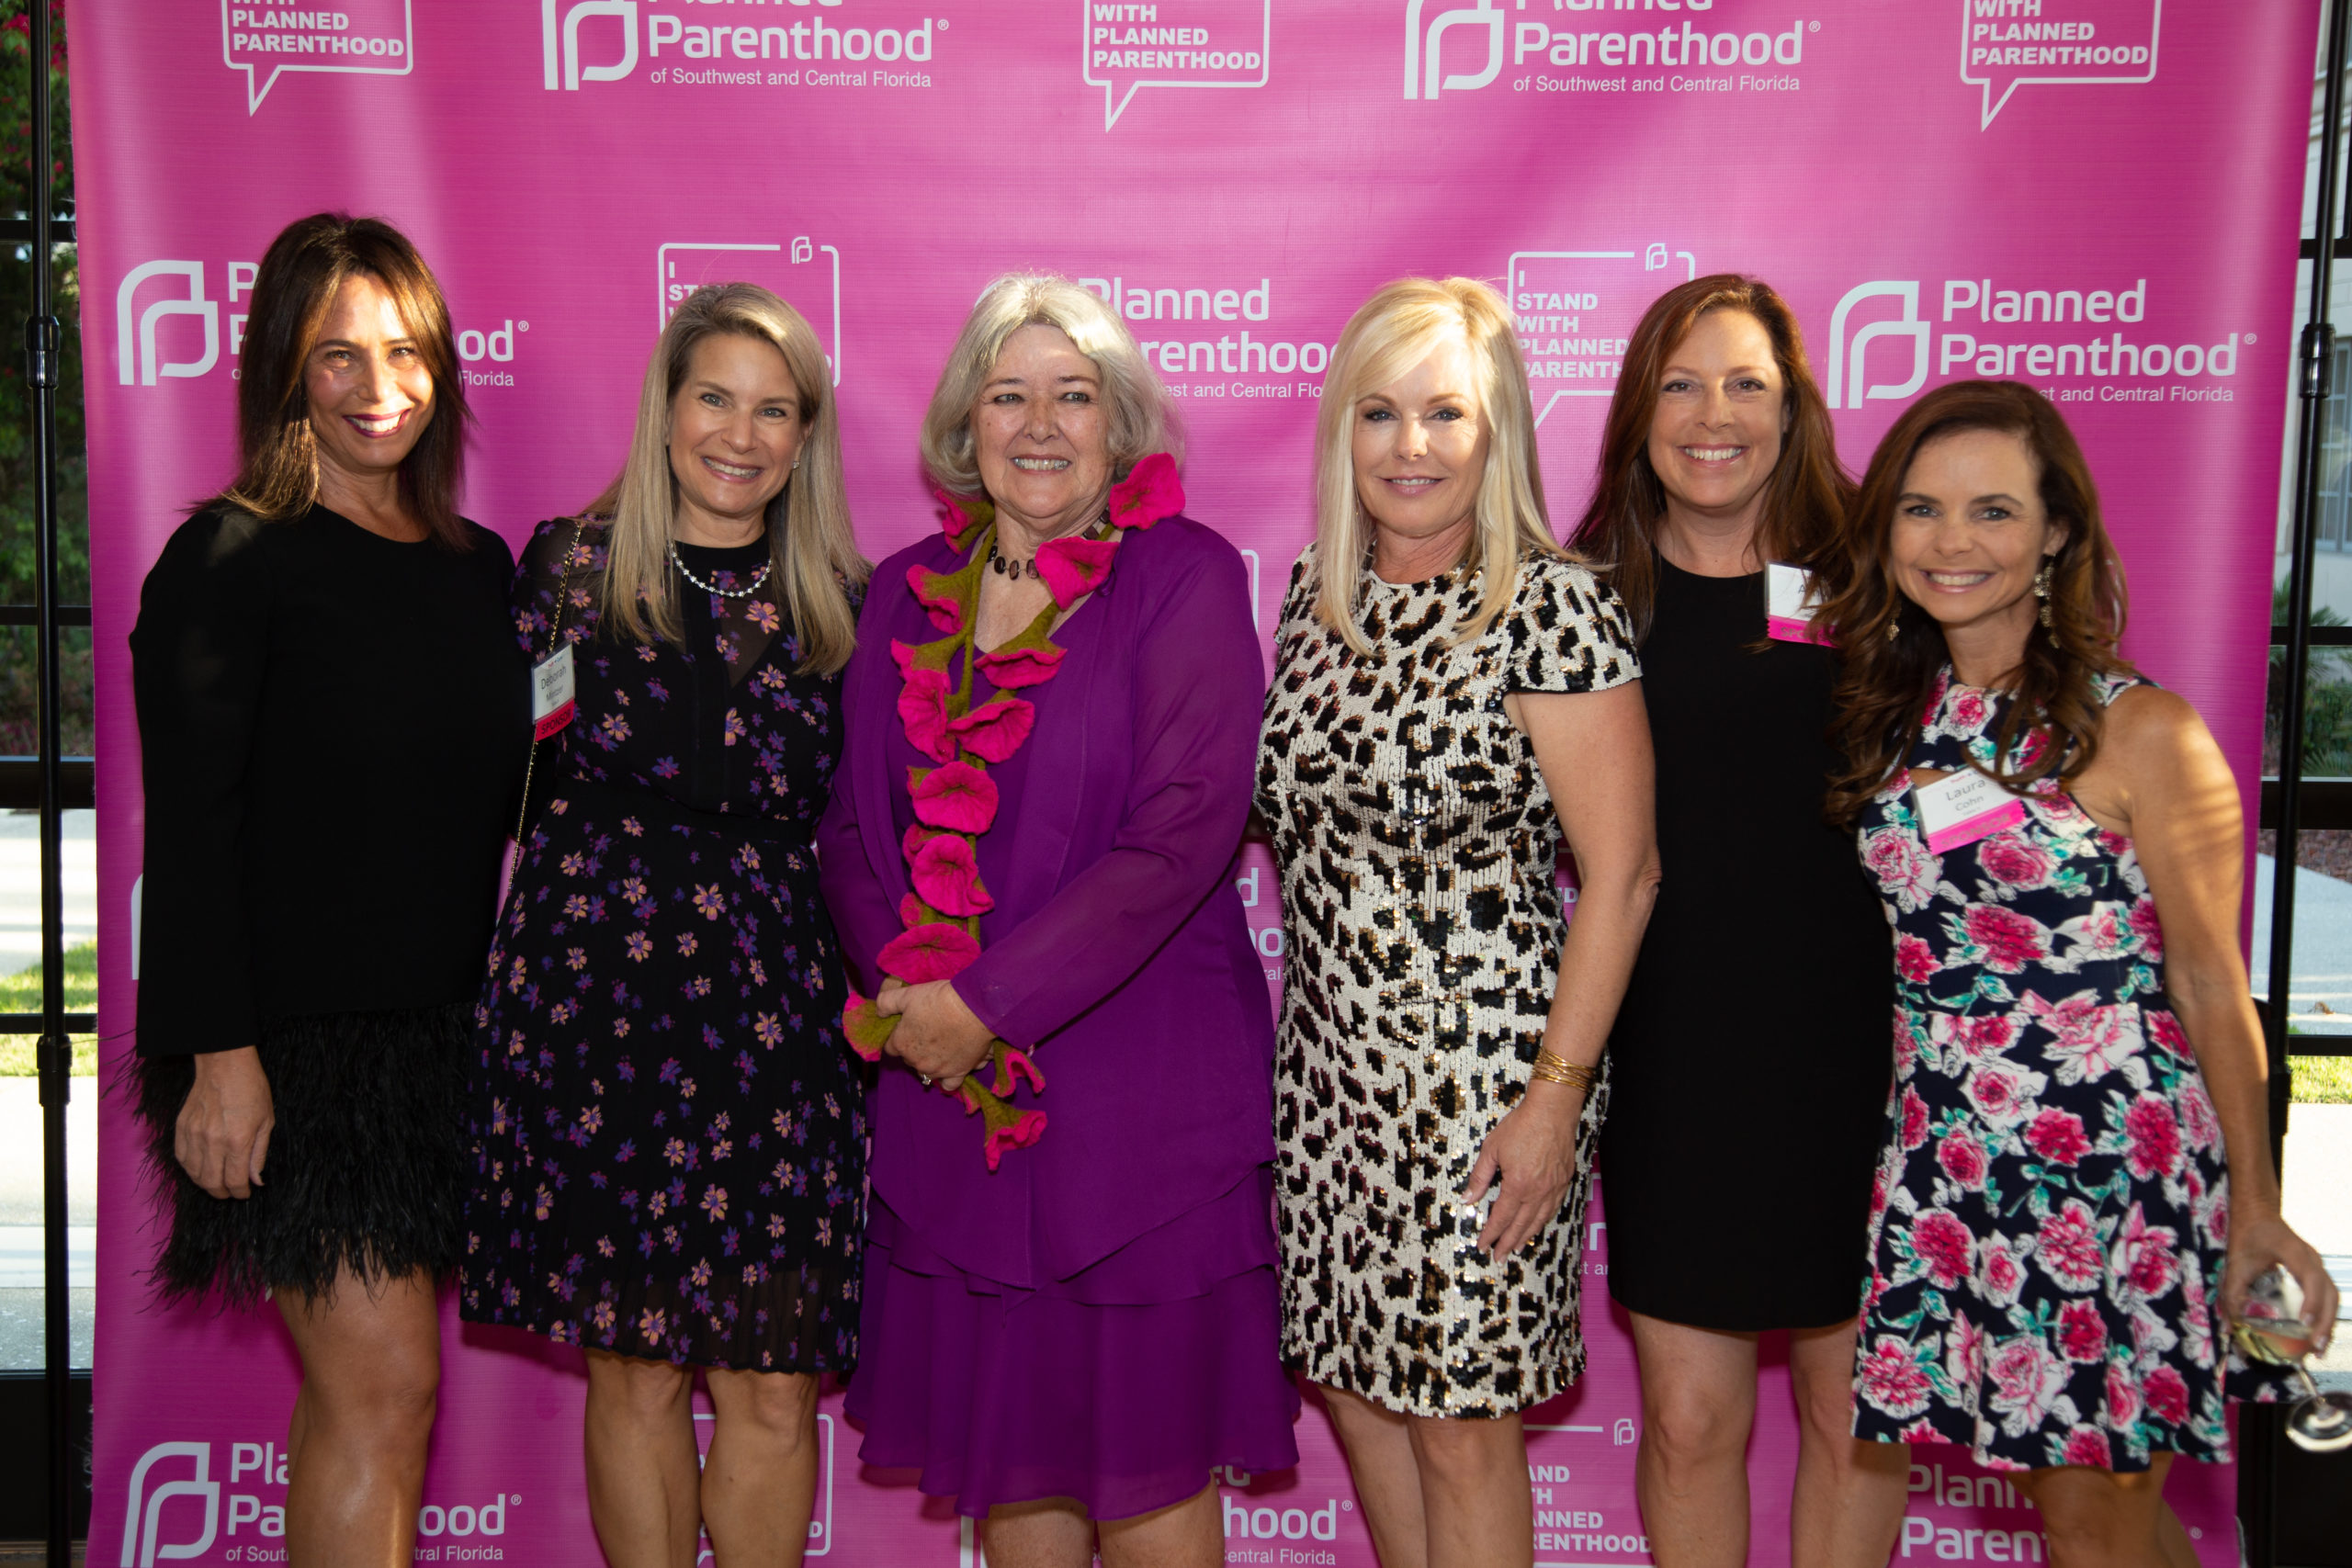 Photo op for Planned Parenthood fundraiser featuring Pat Schroeder